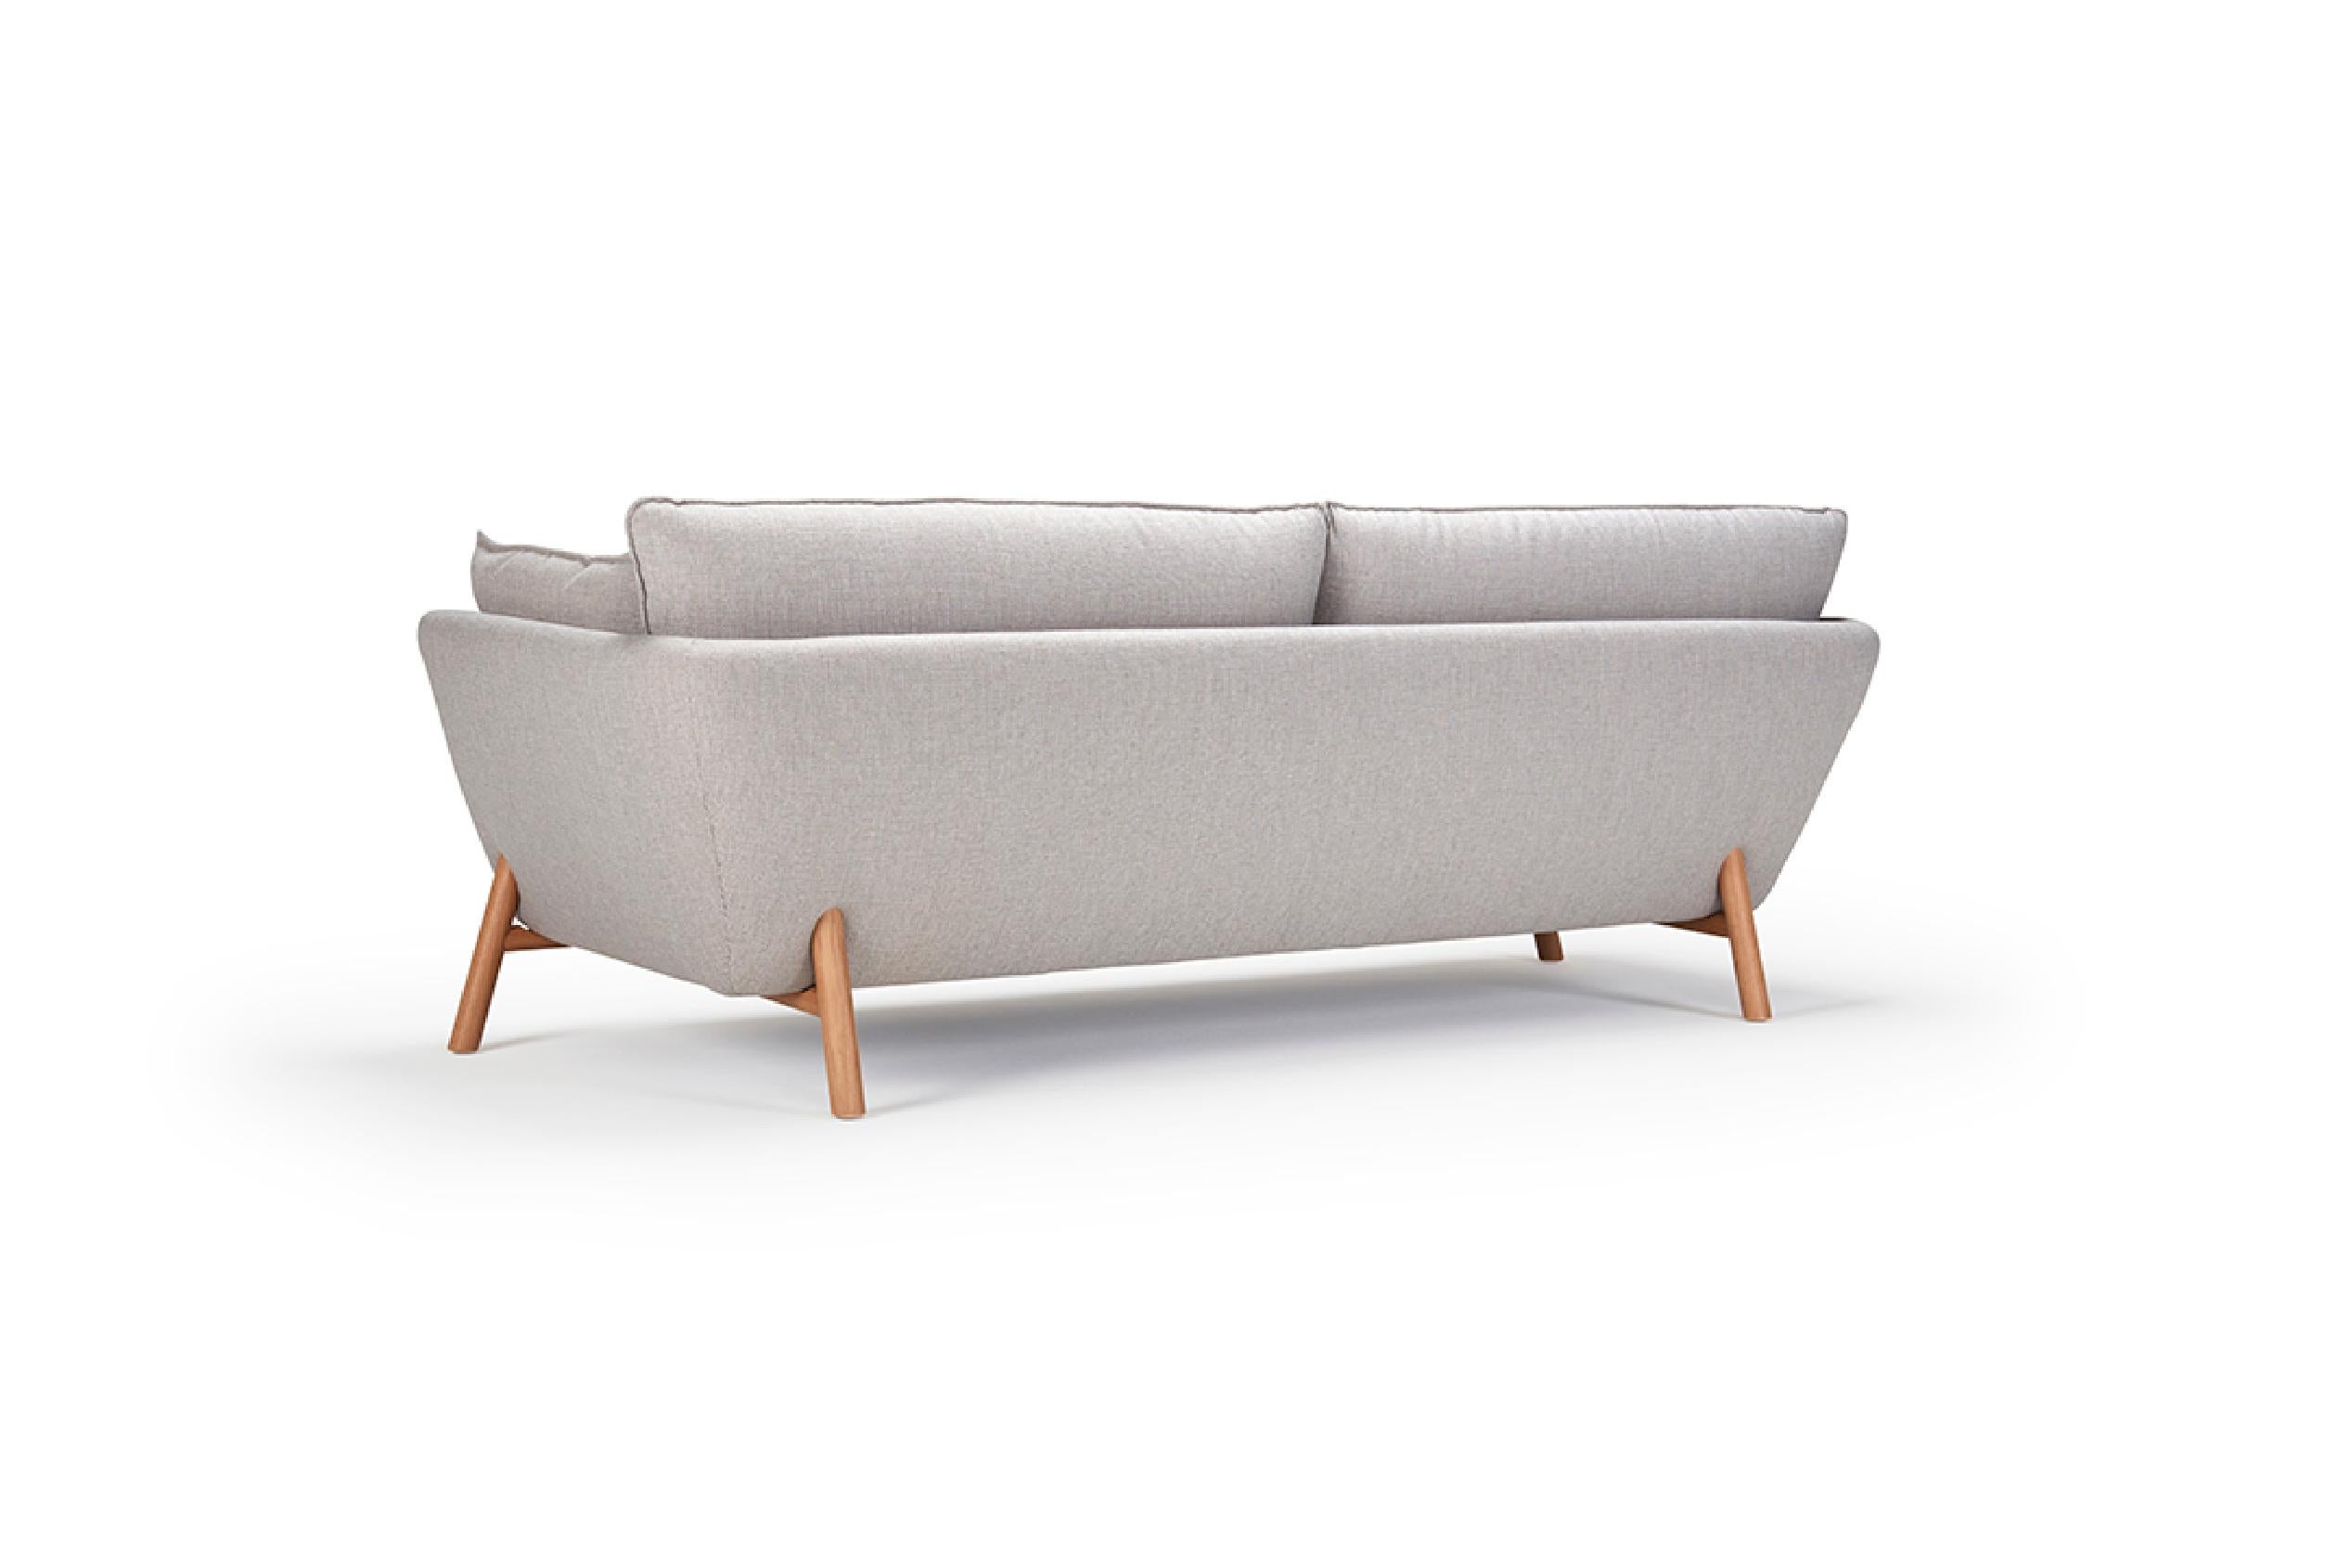 The Nave 2 Seater Sofa, with its clear contemporary allure, offers a harmonious blend of comfort and style. This OEM product, available with either black metal or oak lacquered legs, boasts a variety of fabric or wool upholstery finishes, inviting